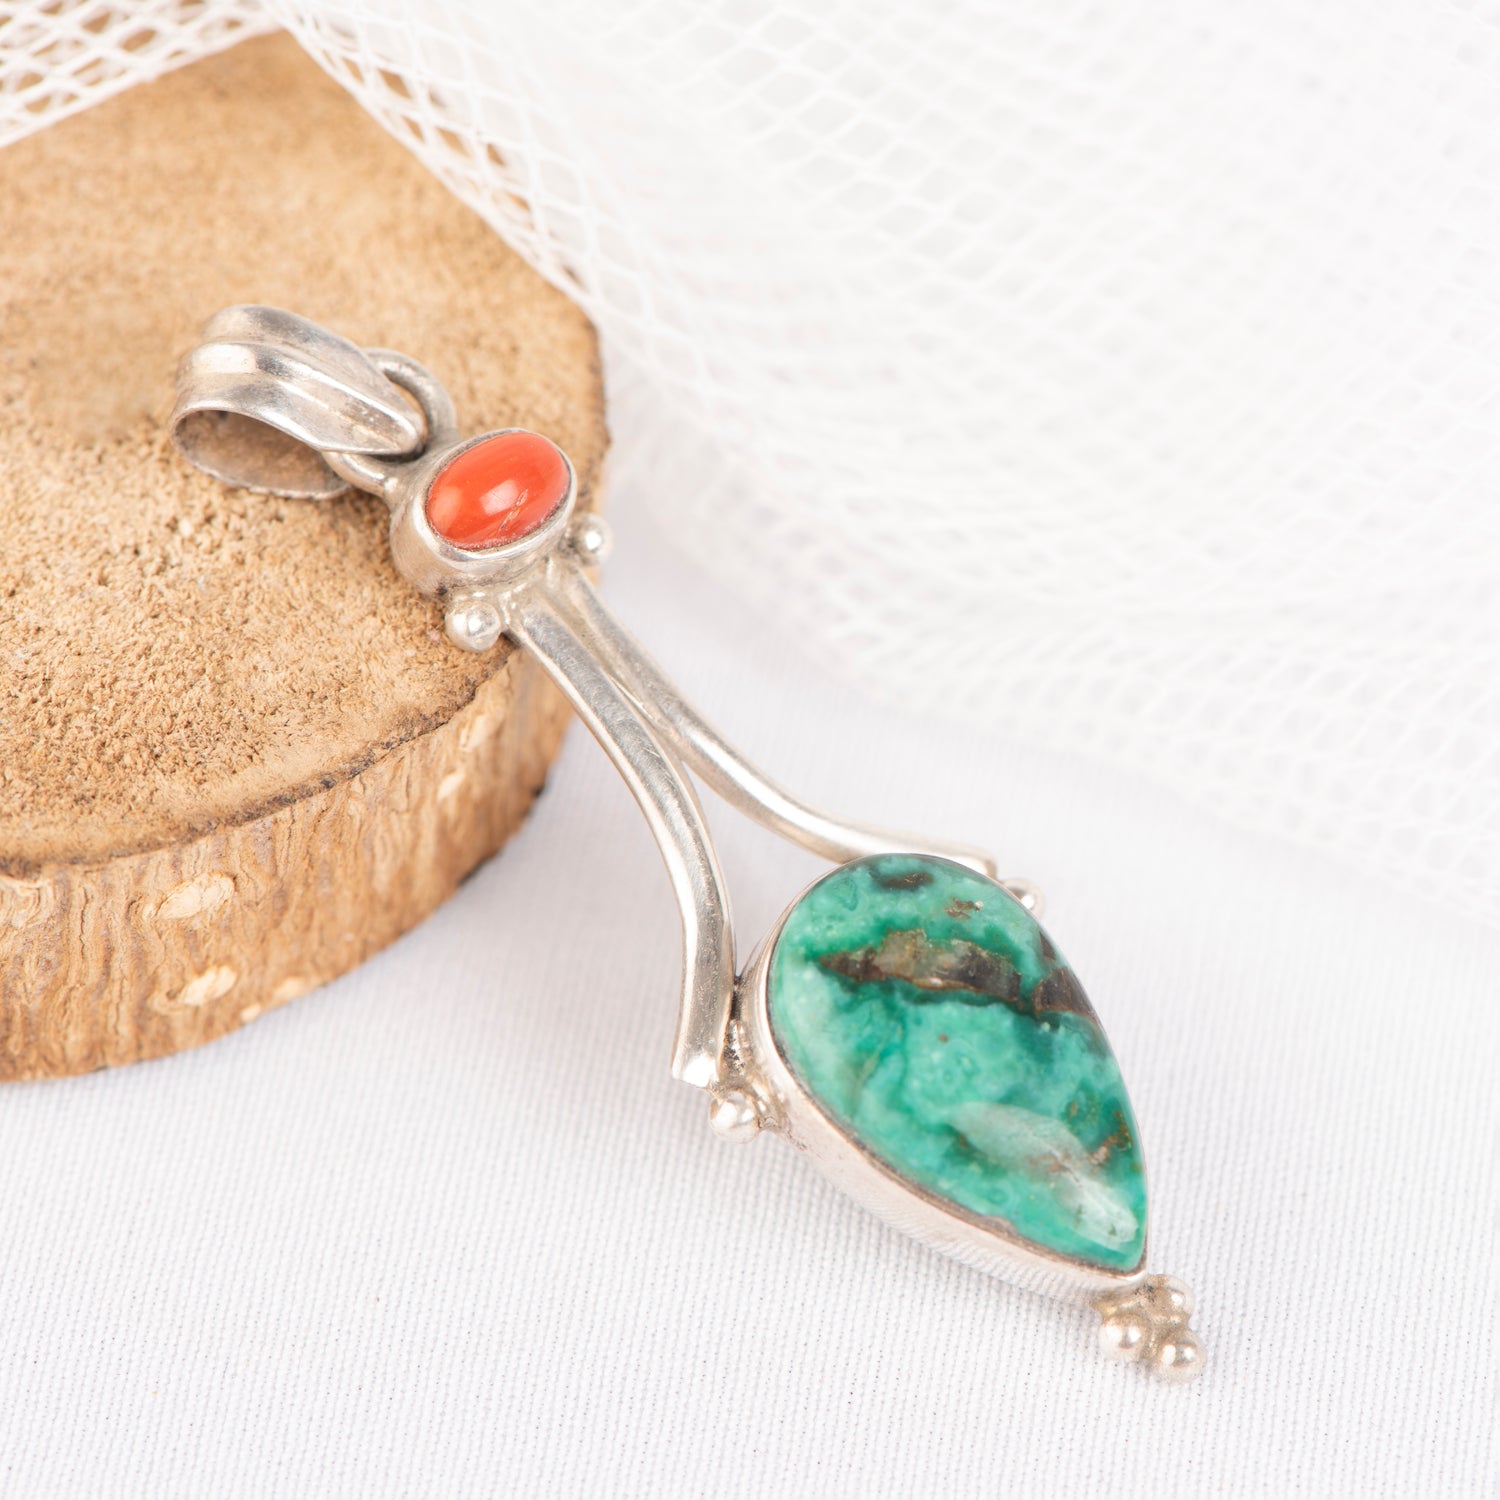 Turquoise and Coral Silver Pendant